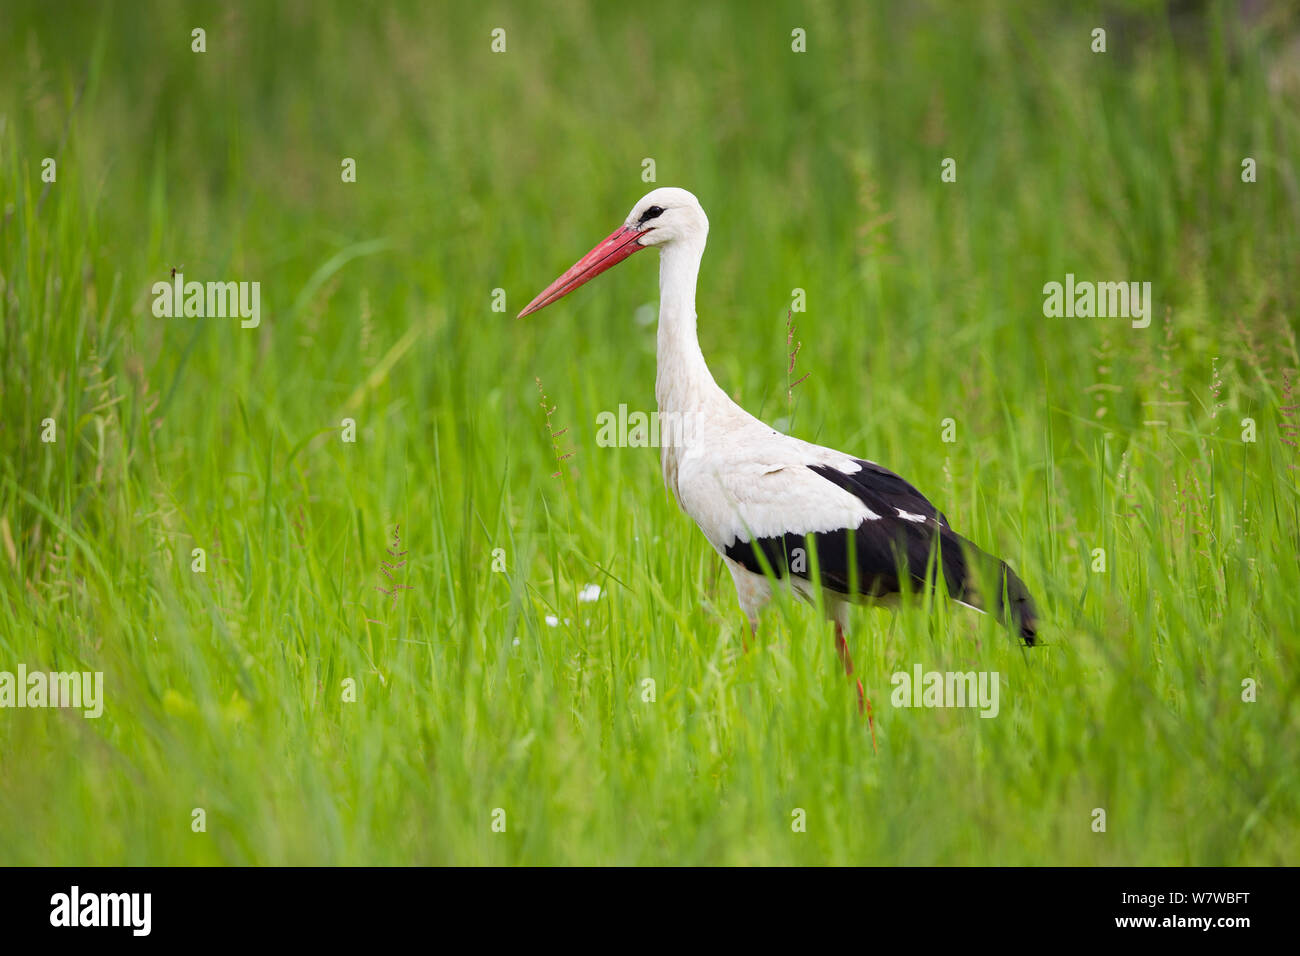 White stork (Ciconia ciconia) walking in tall grass, South Luangwa National Park, Zambia. January. Stock Photo